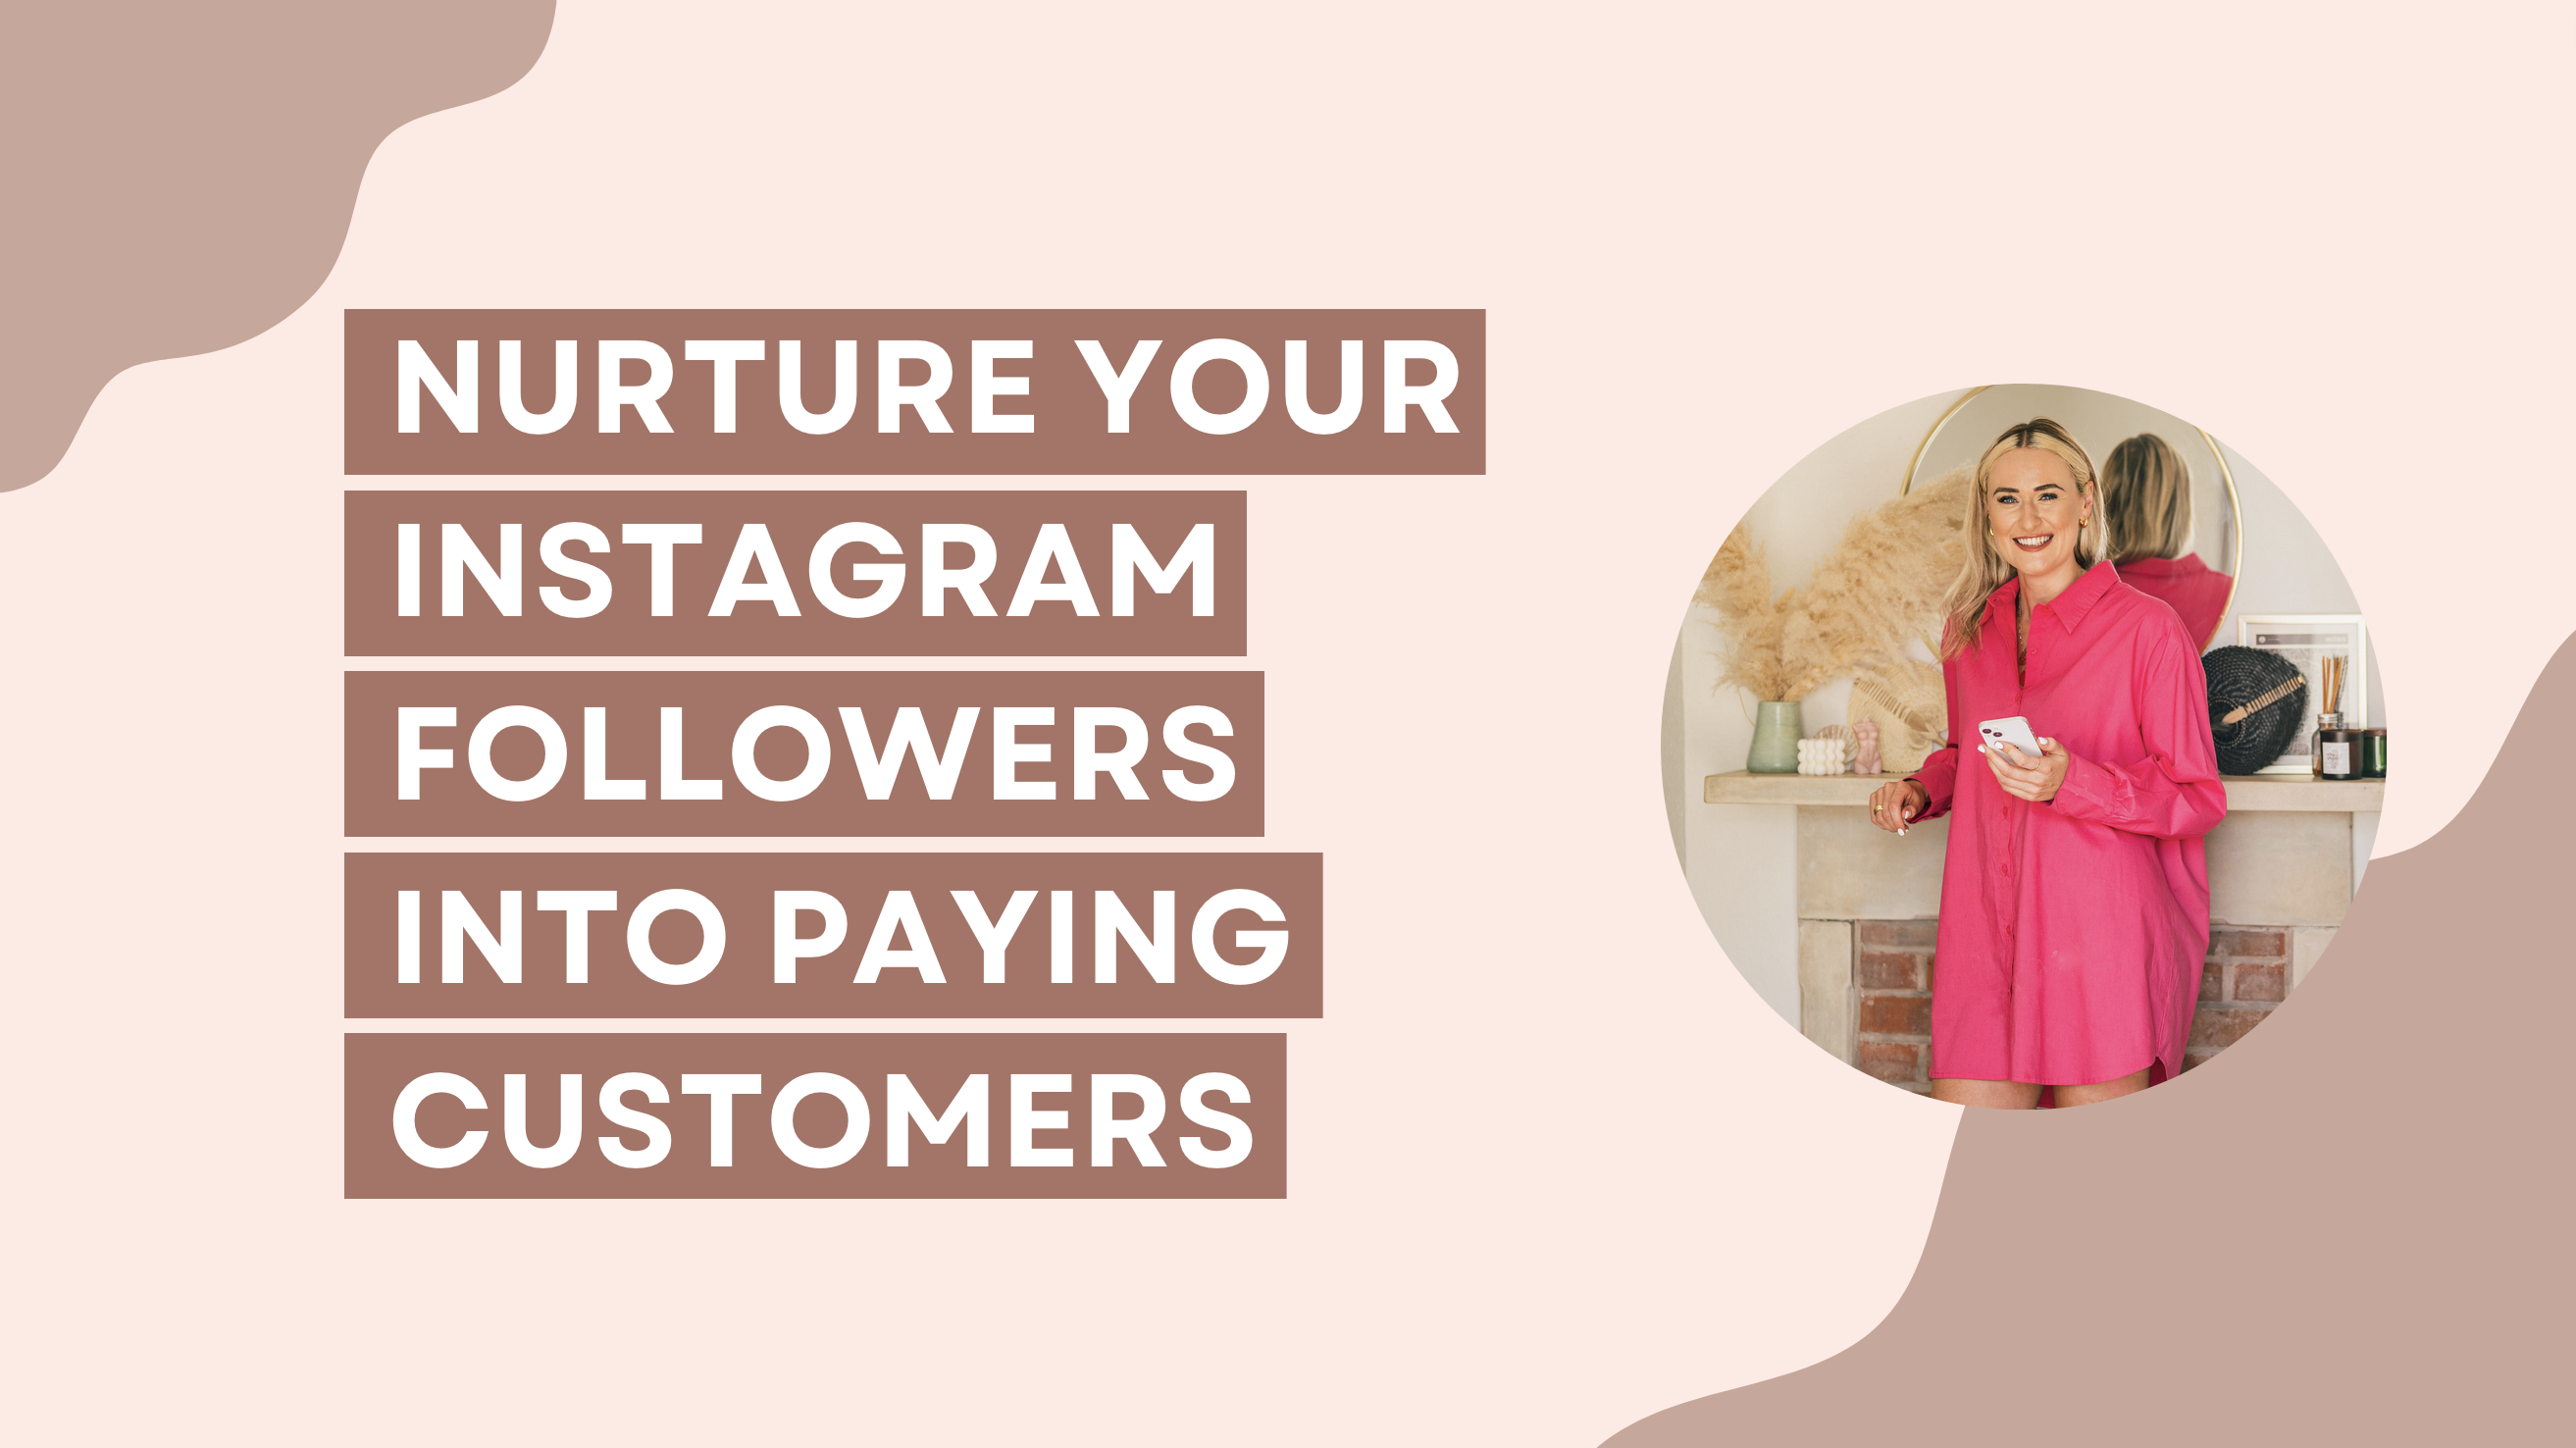 Nurture Your Instagram Followers into Paying Customers